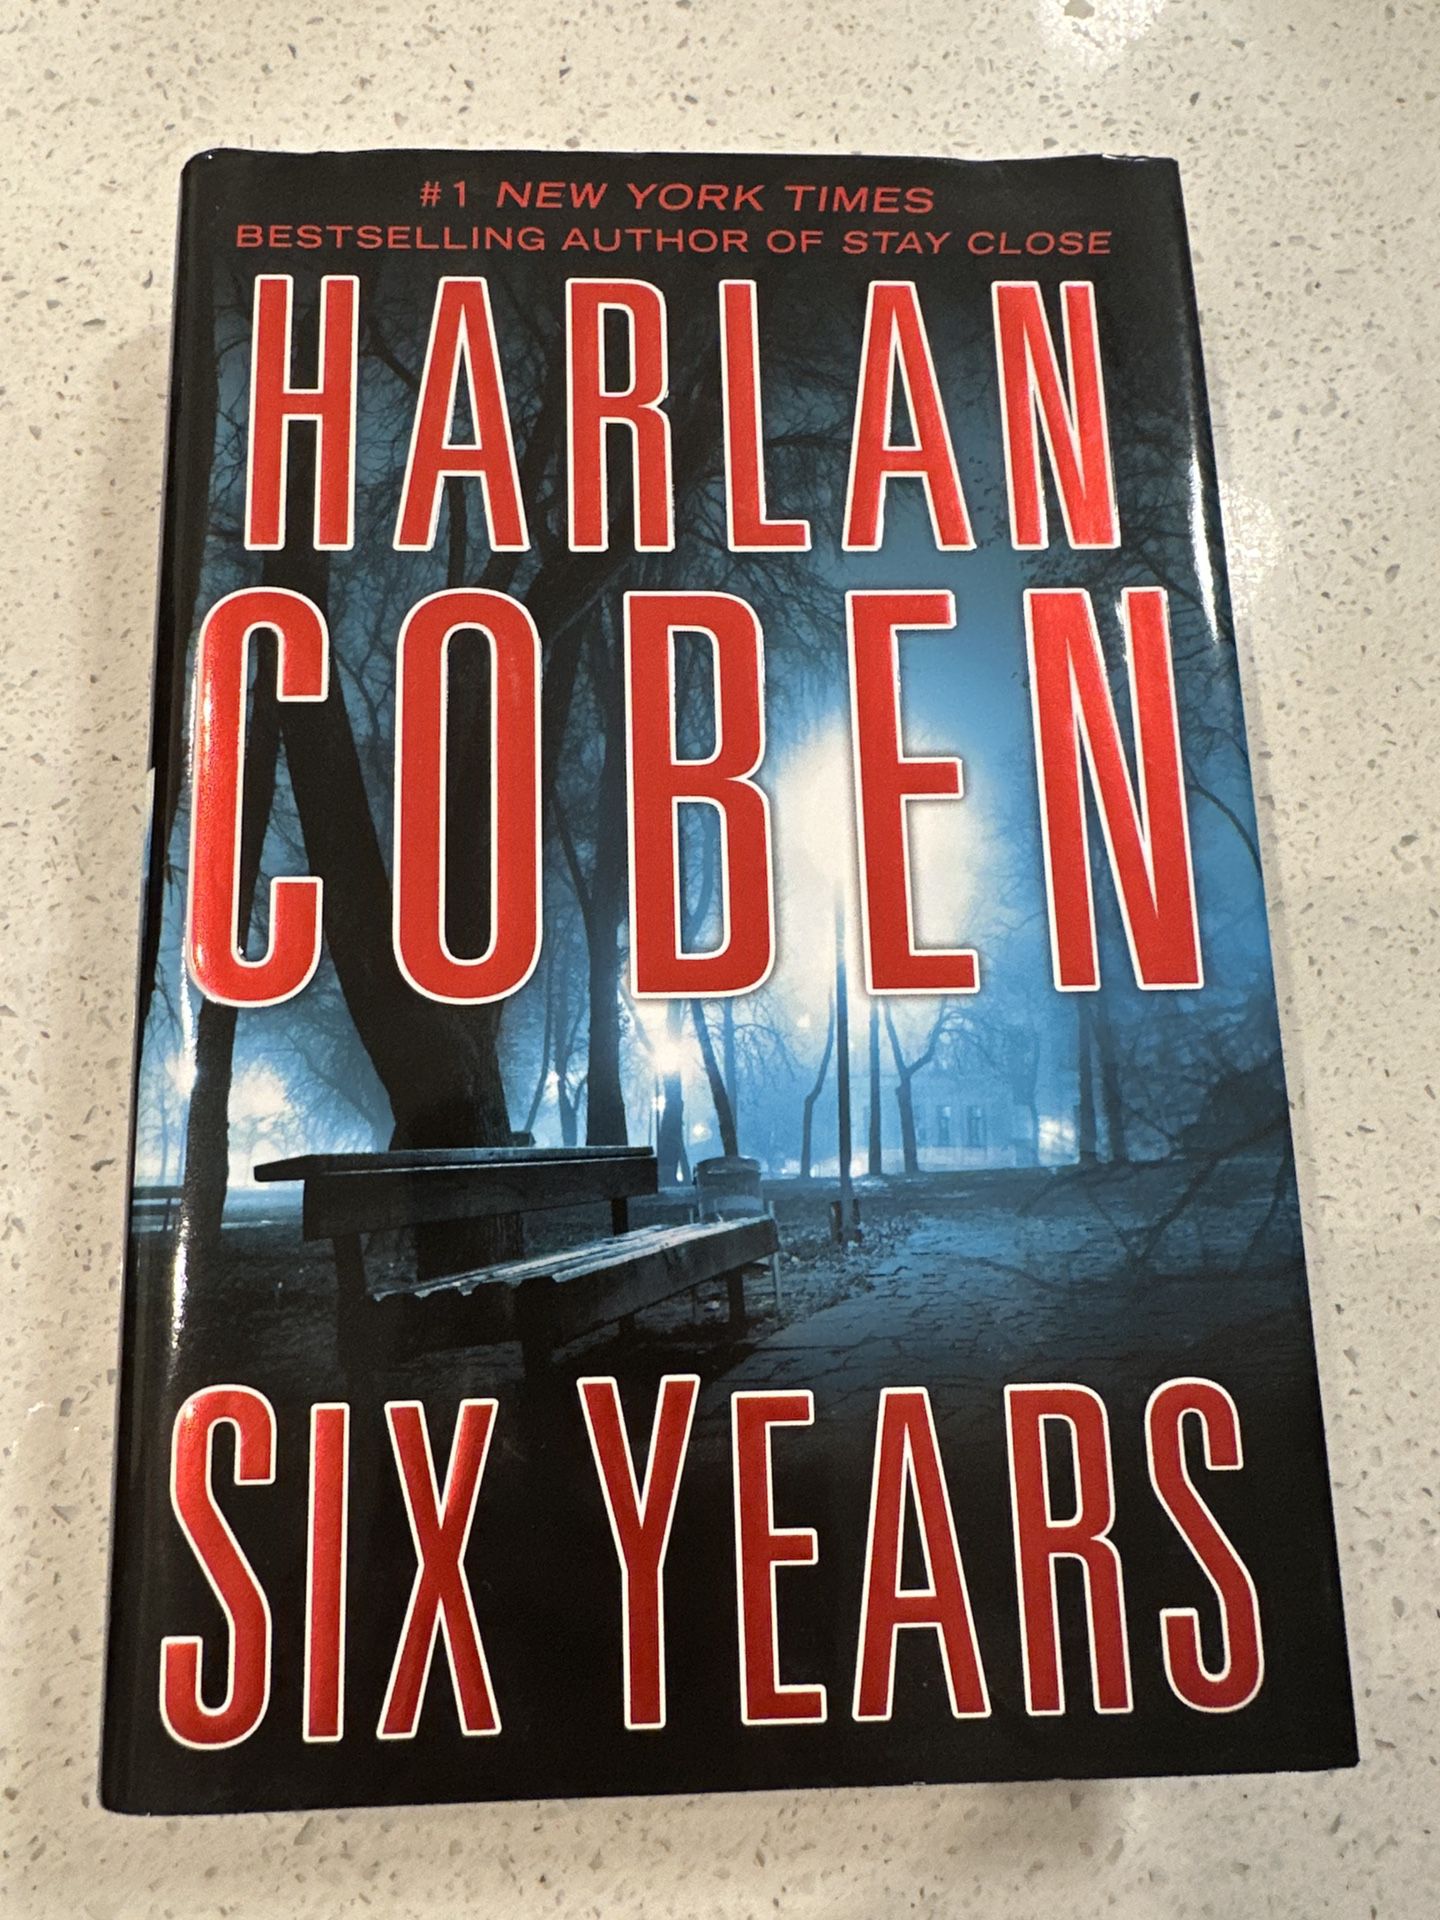 Six Years by Harlan Coben - Hardcover 